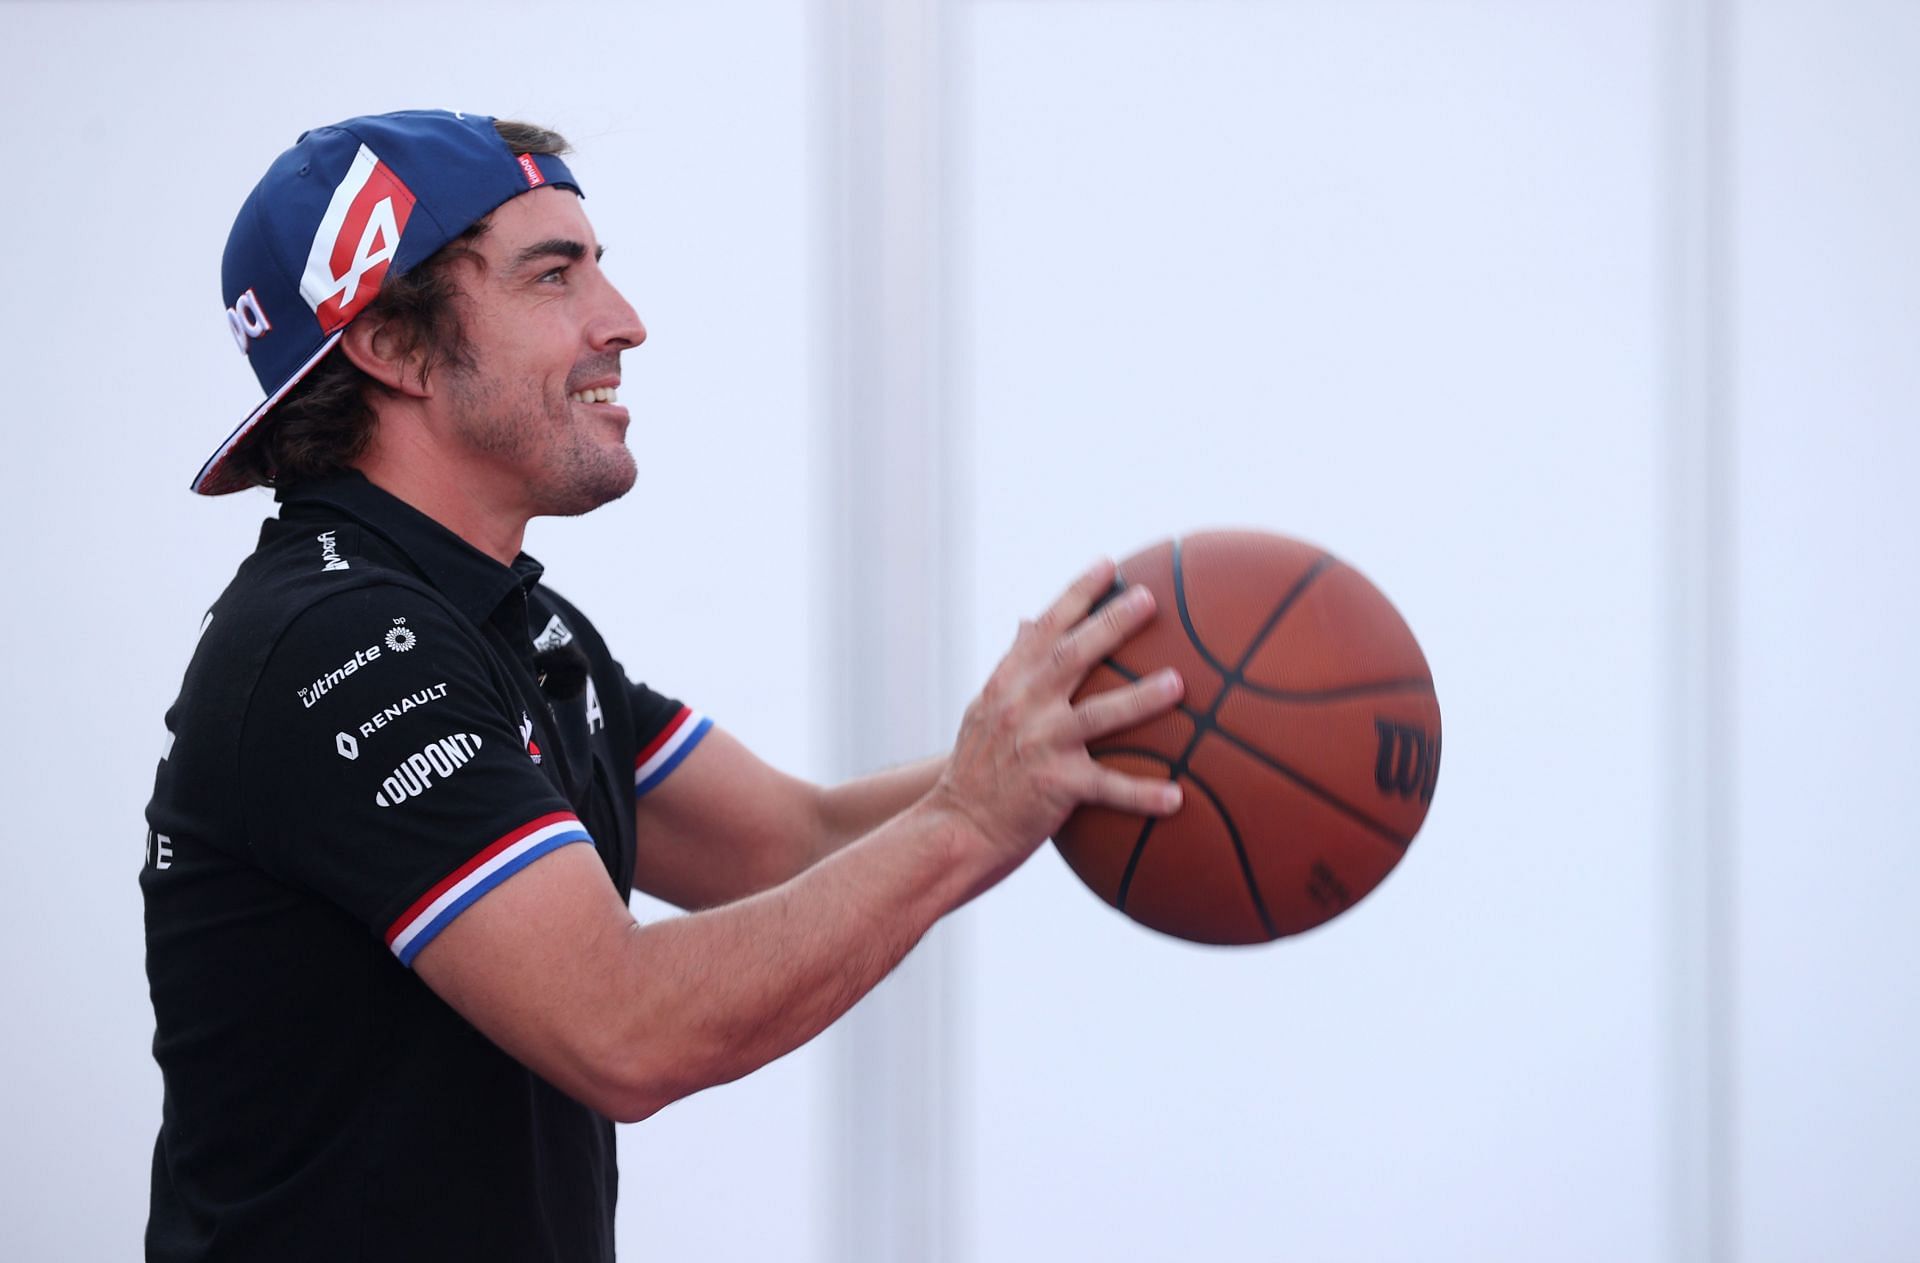 F1 Grand Prix of USA - PreviewsFernando Alonso will be startng the race at the back of the grind in the US GP 2021. Photo: Chris Gaythen/Getty Images